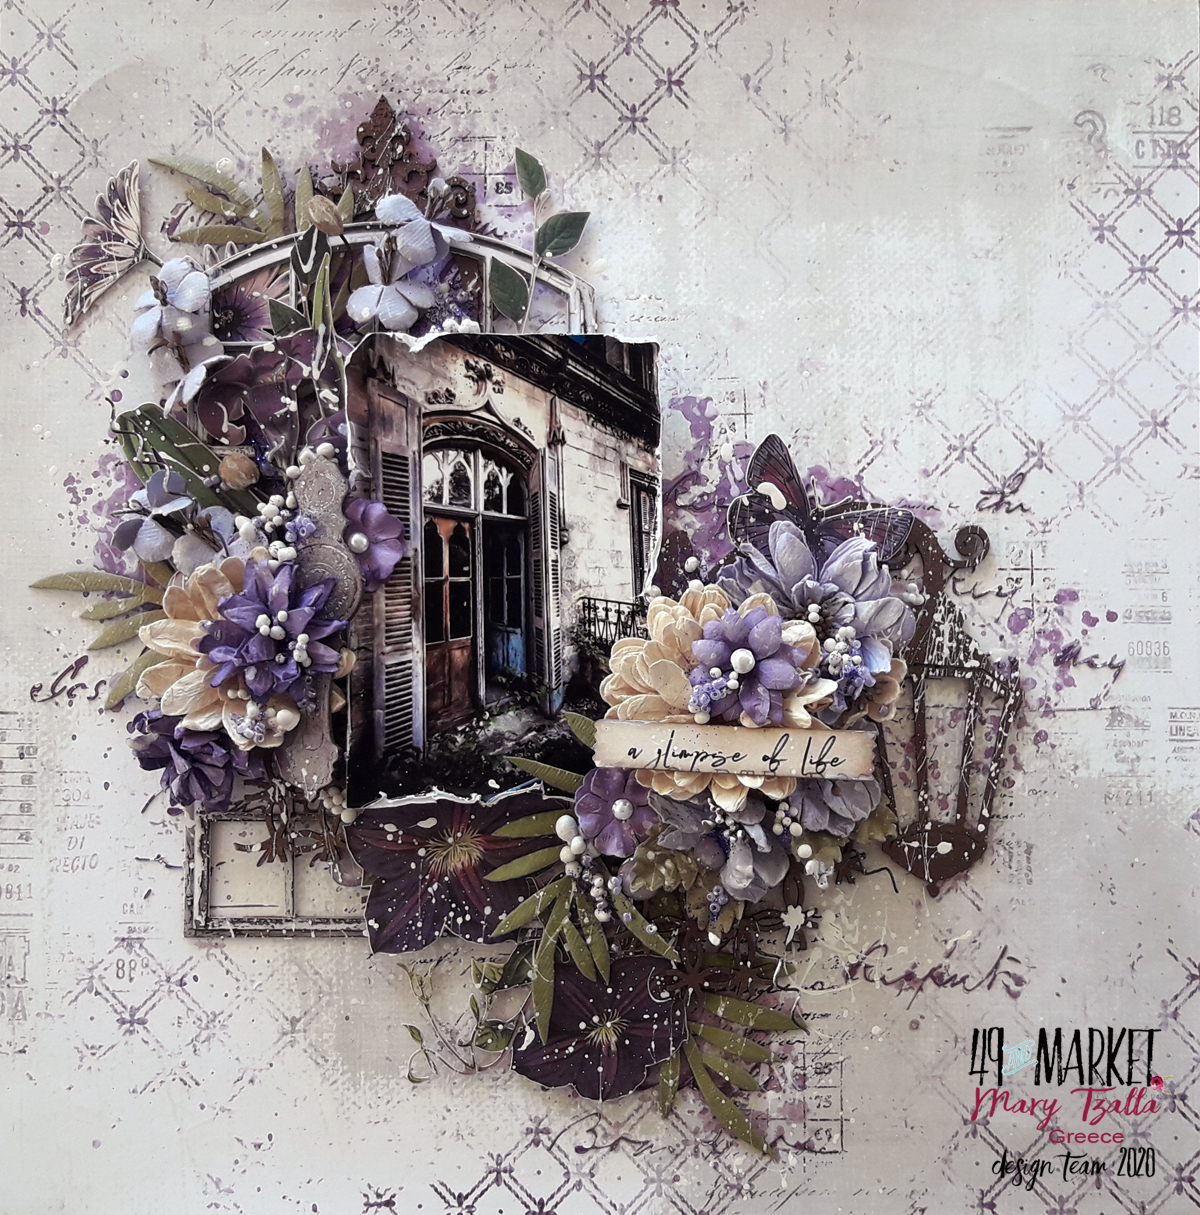 A Glimpse Of Life - Mixed media layout by Mary Tzalla